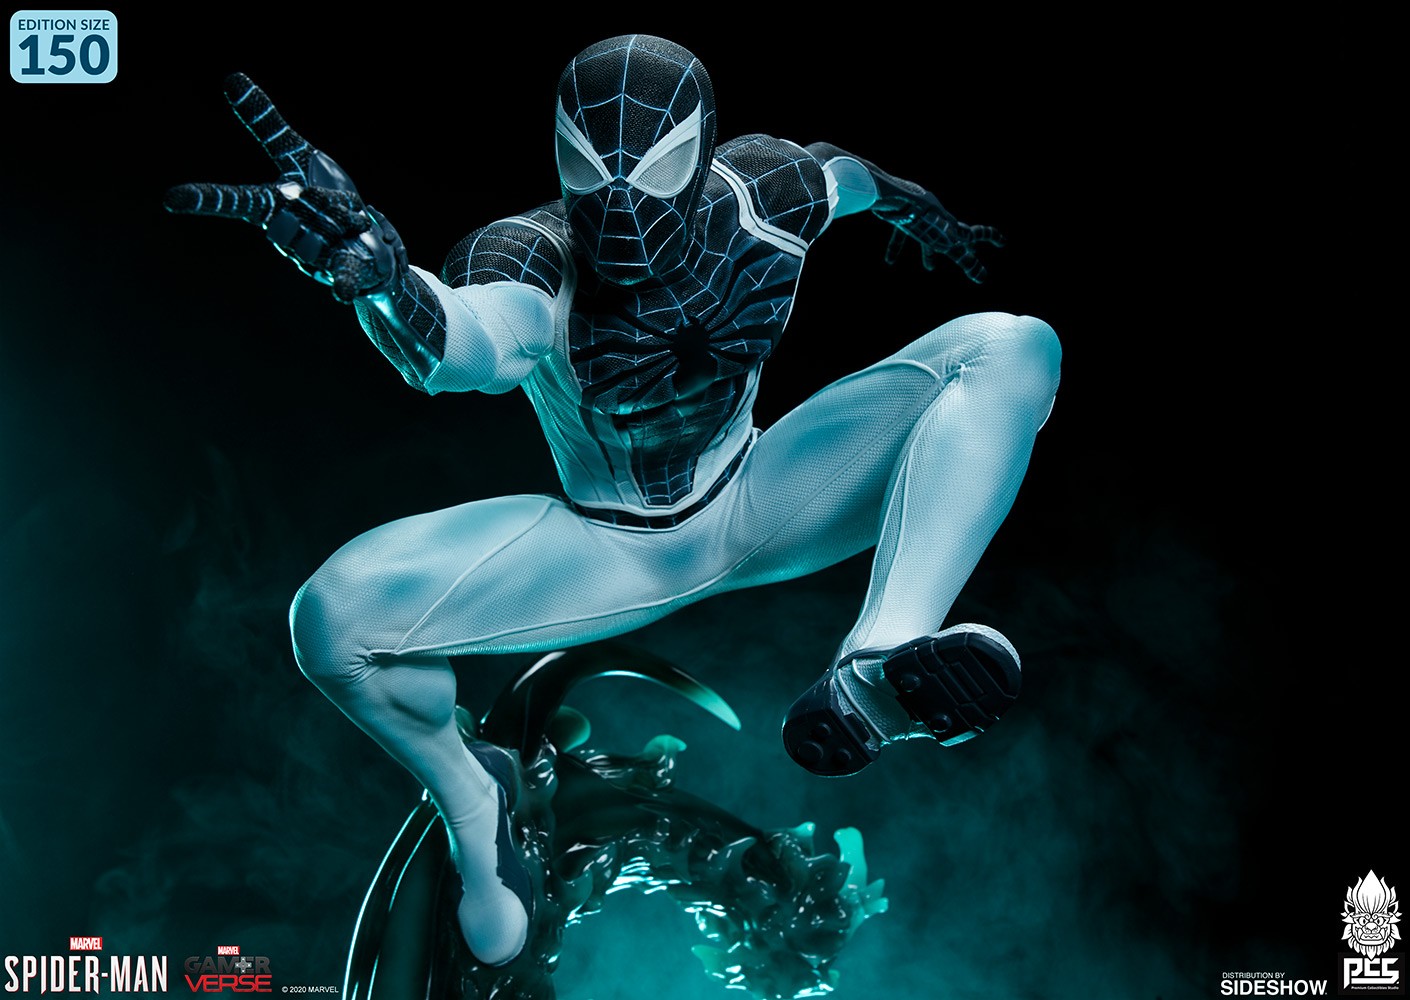 Spider-Man Negative Zone Suit Exclusive Edition (Prototype Shown) View 16